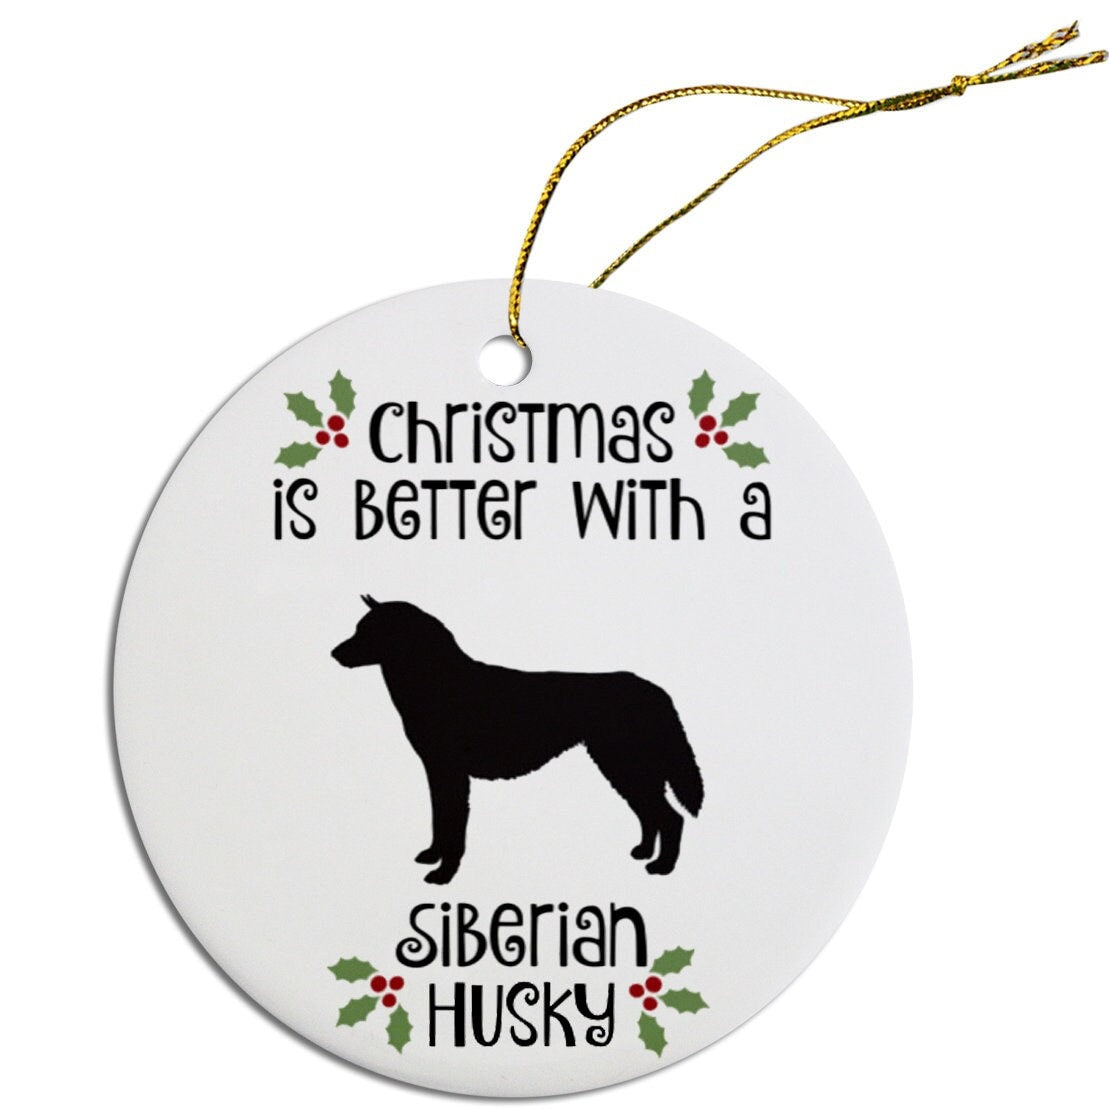 Dog Breed Specific Round Christmas Ornament, "Siberian Husky"